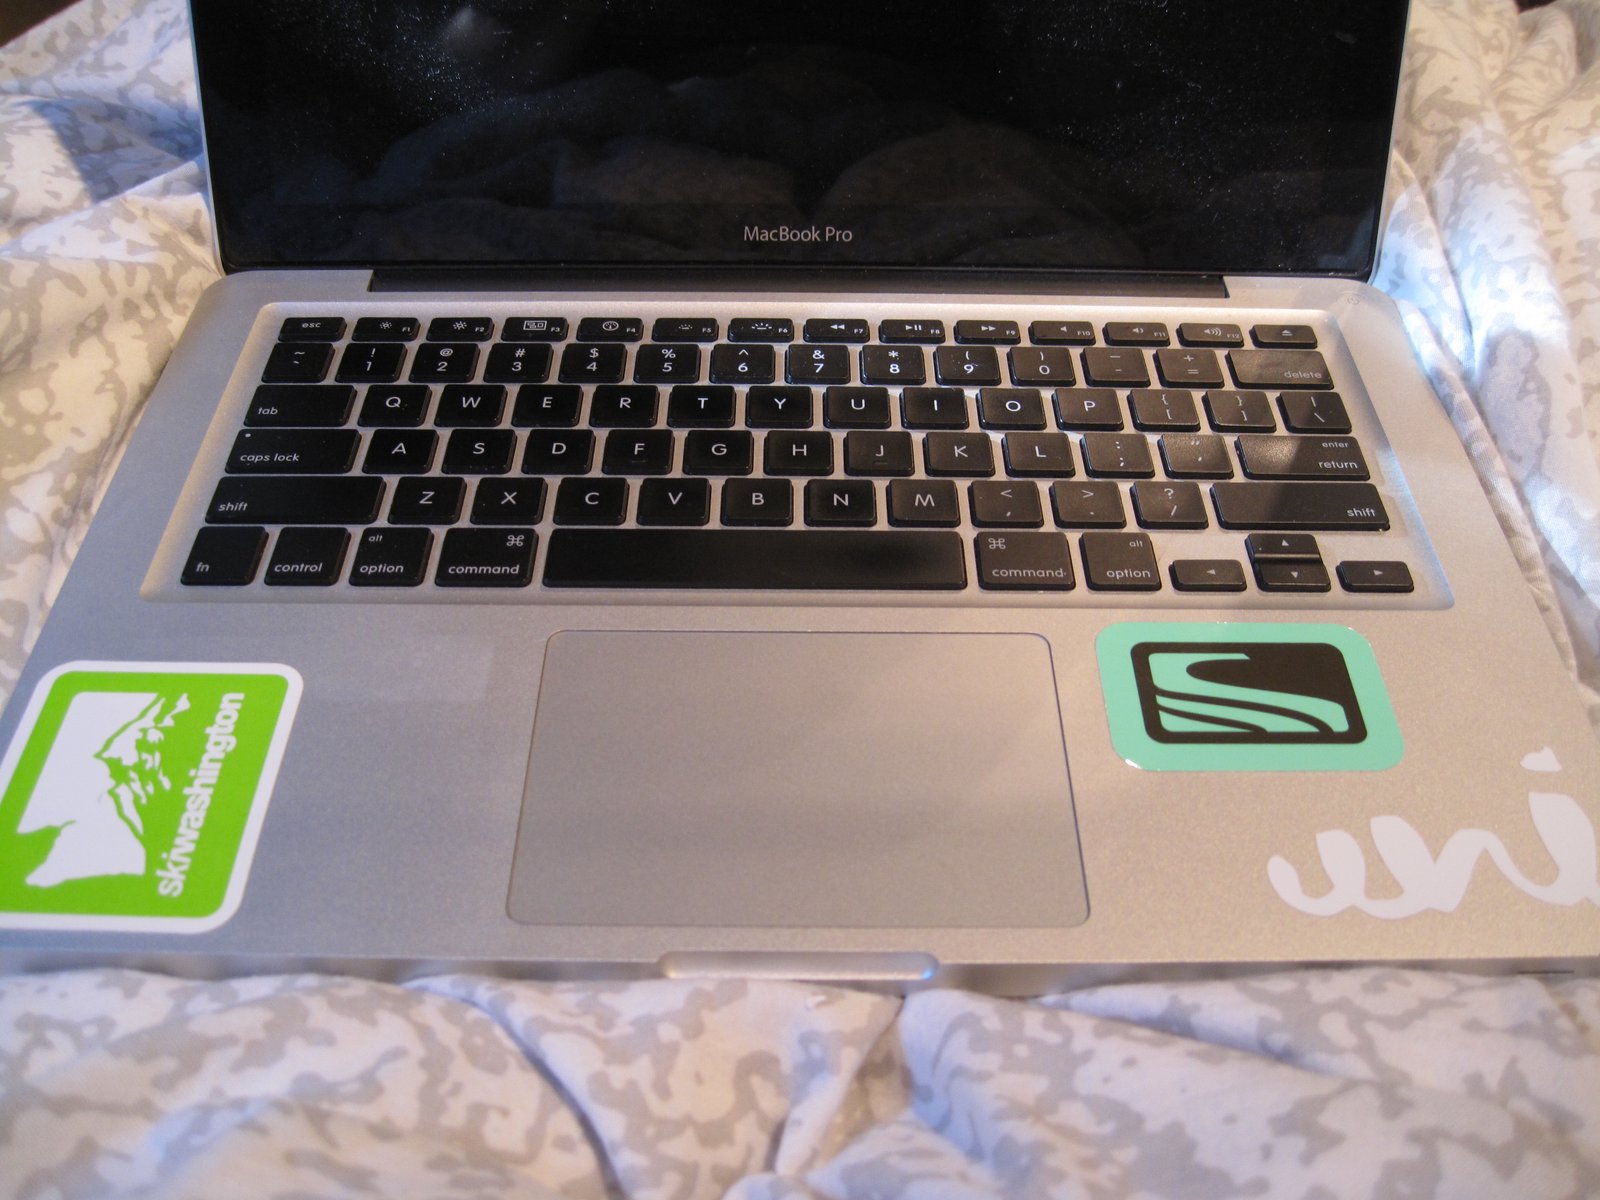 More laptop stickers!